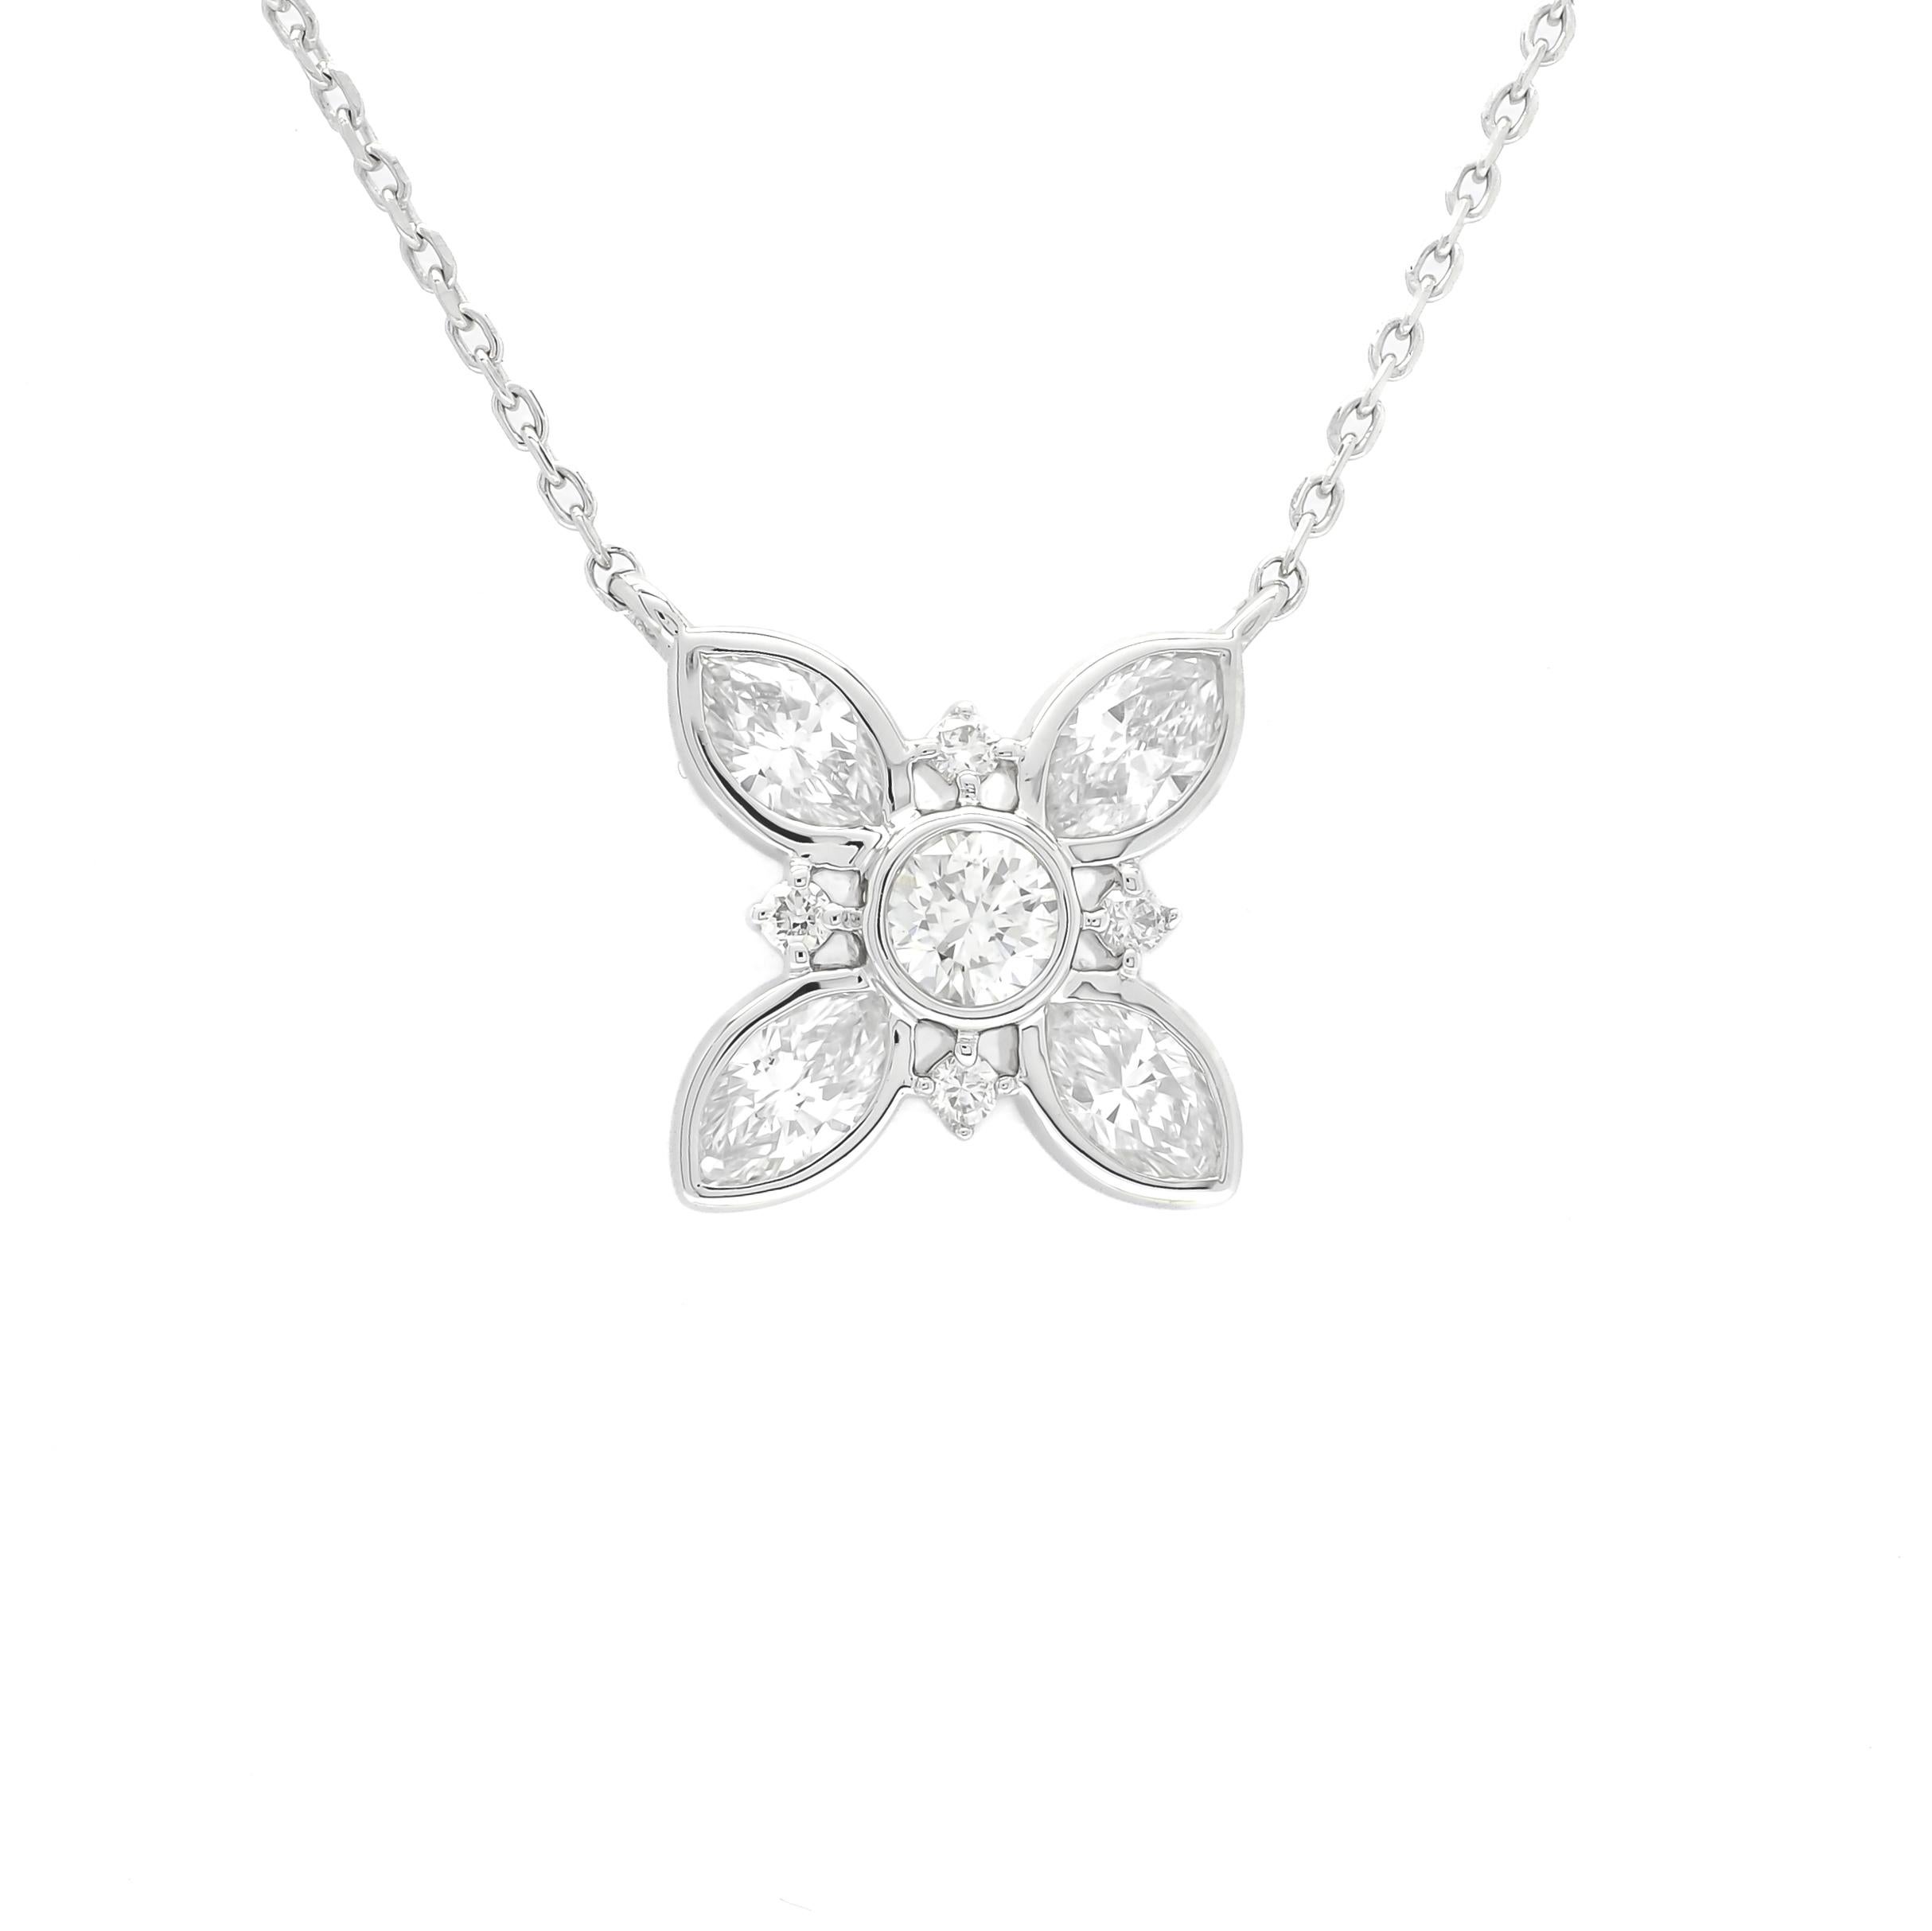 Round Cut Natural Diamond 0.65 carats 18KT White Gold Flower Pendant Chain Necklace   For Sale